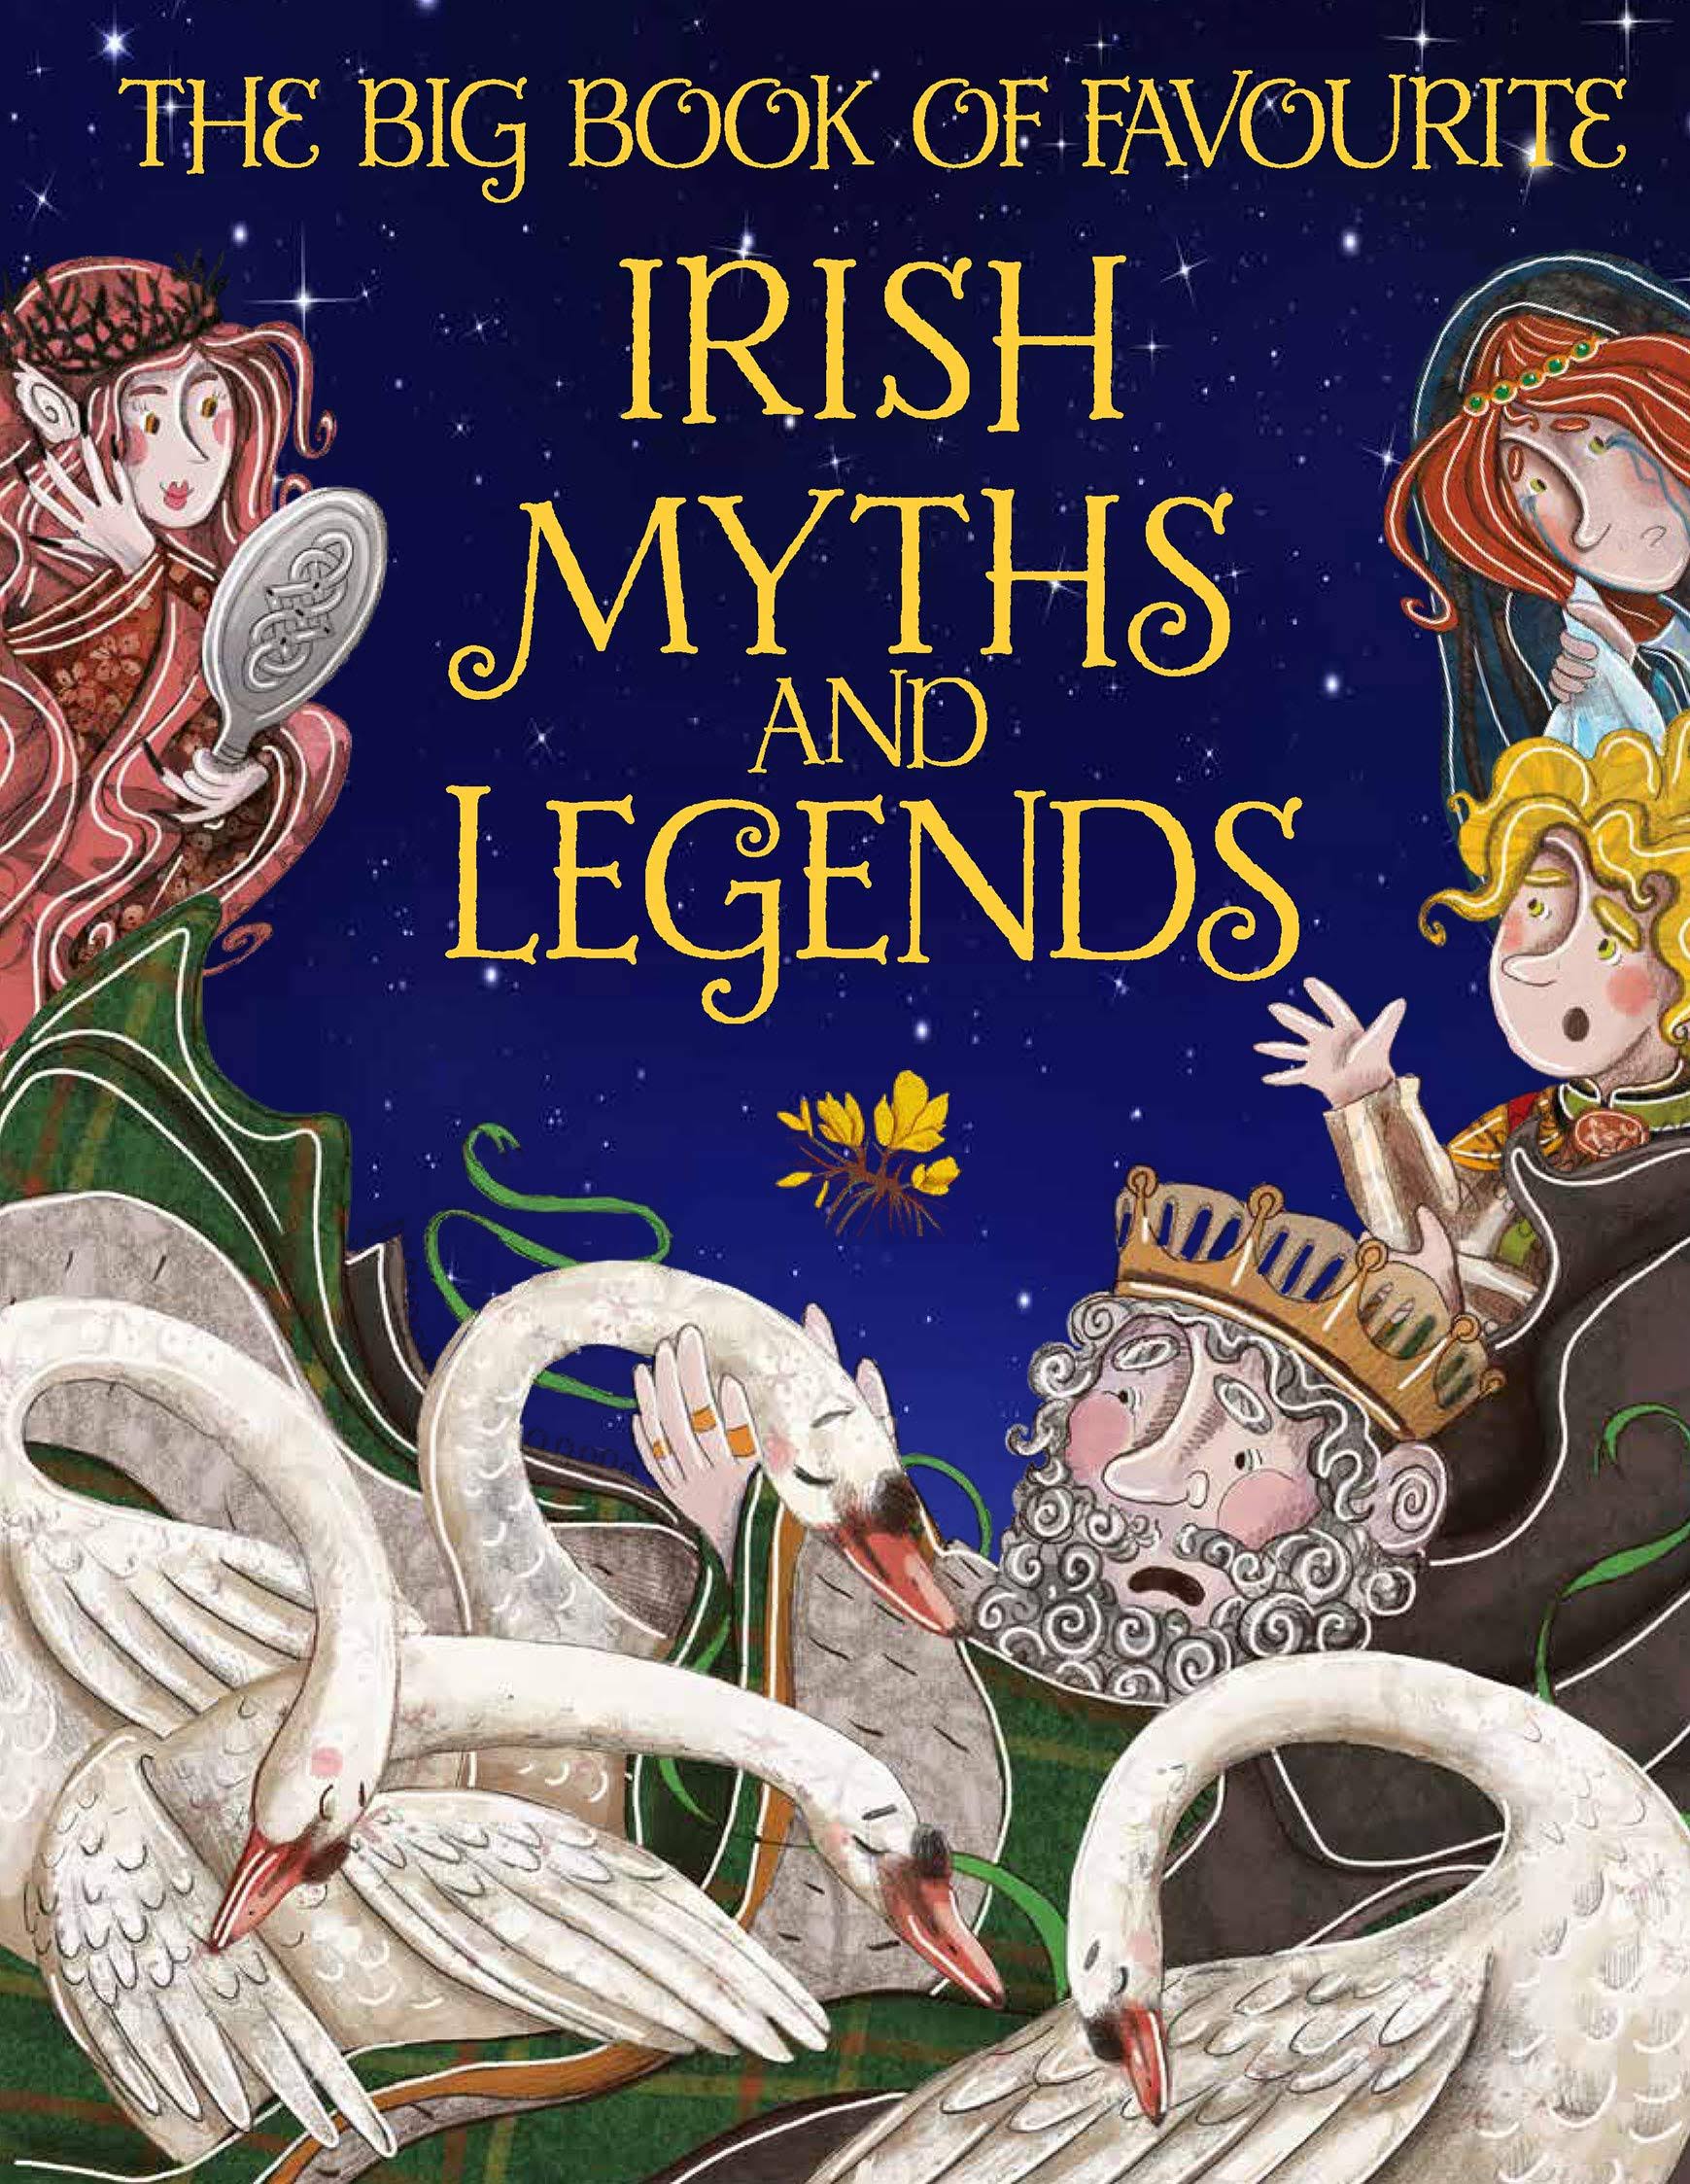 The Big Book of Favourite Irish Myths and Legends [Book]